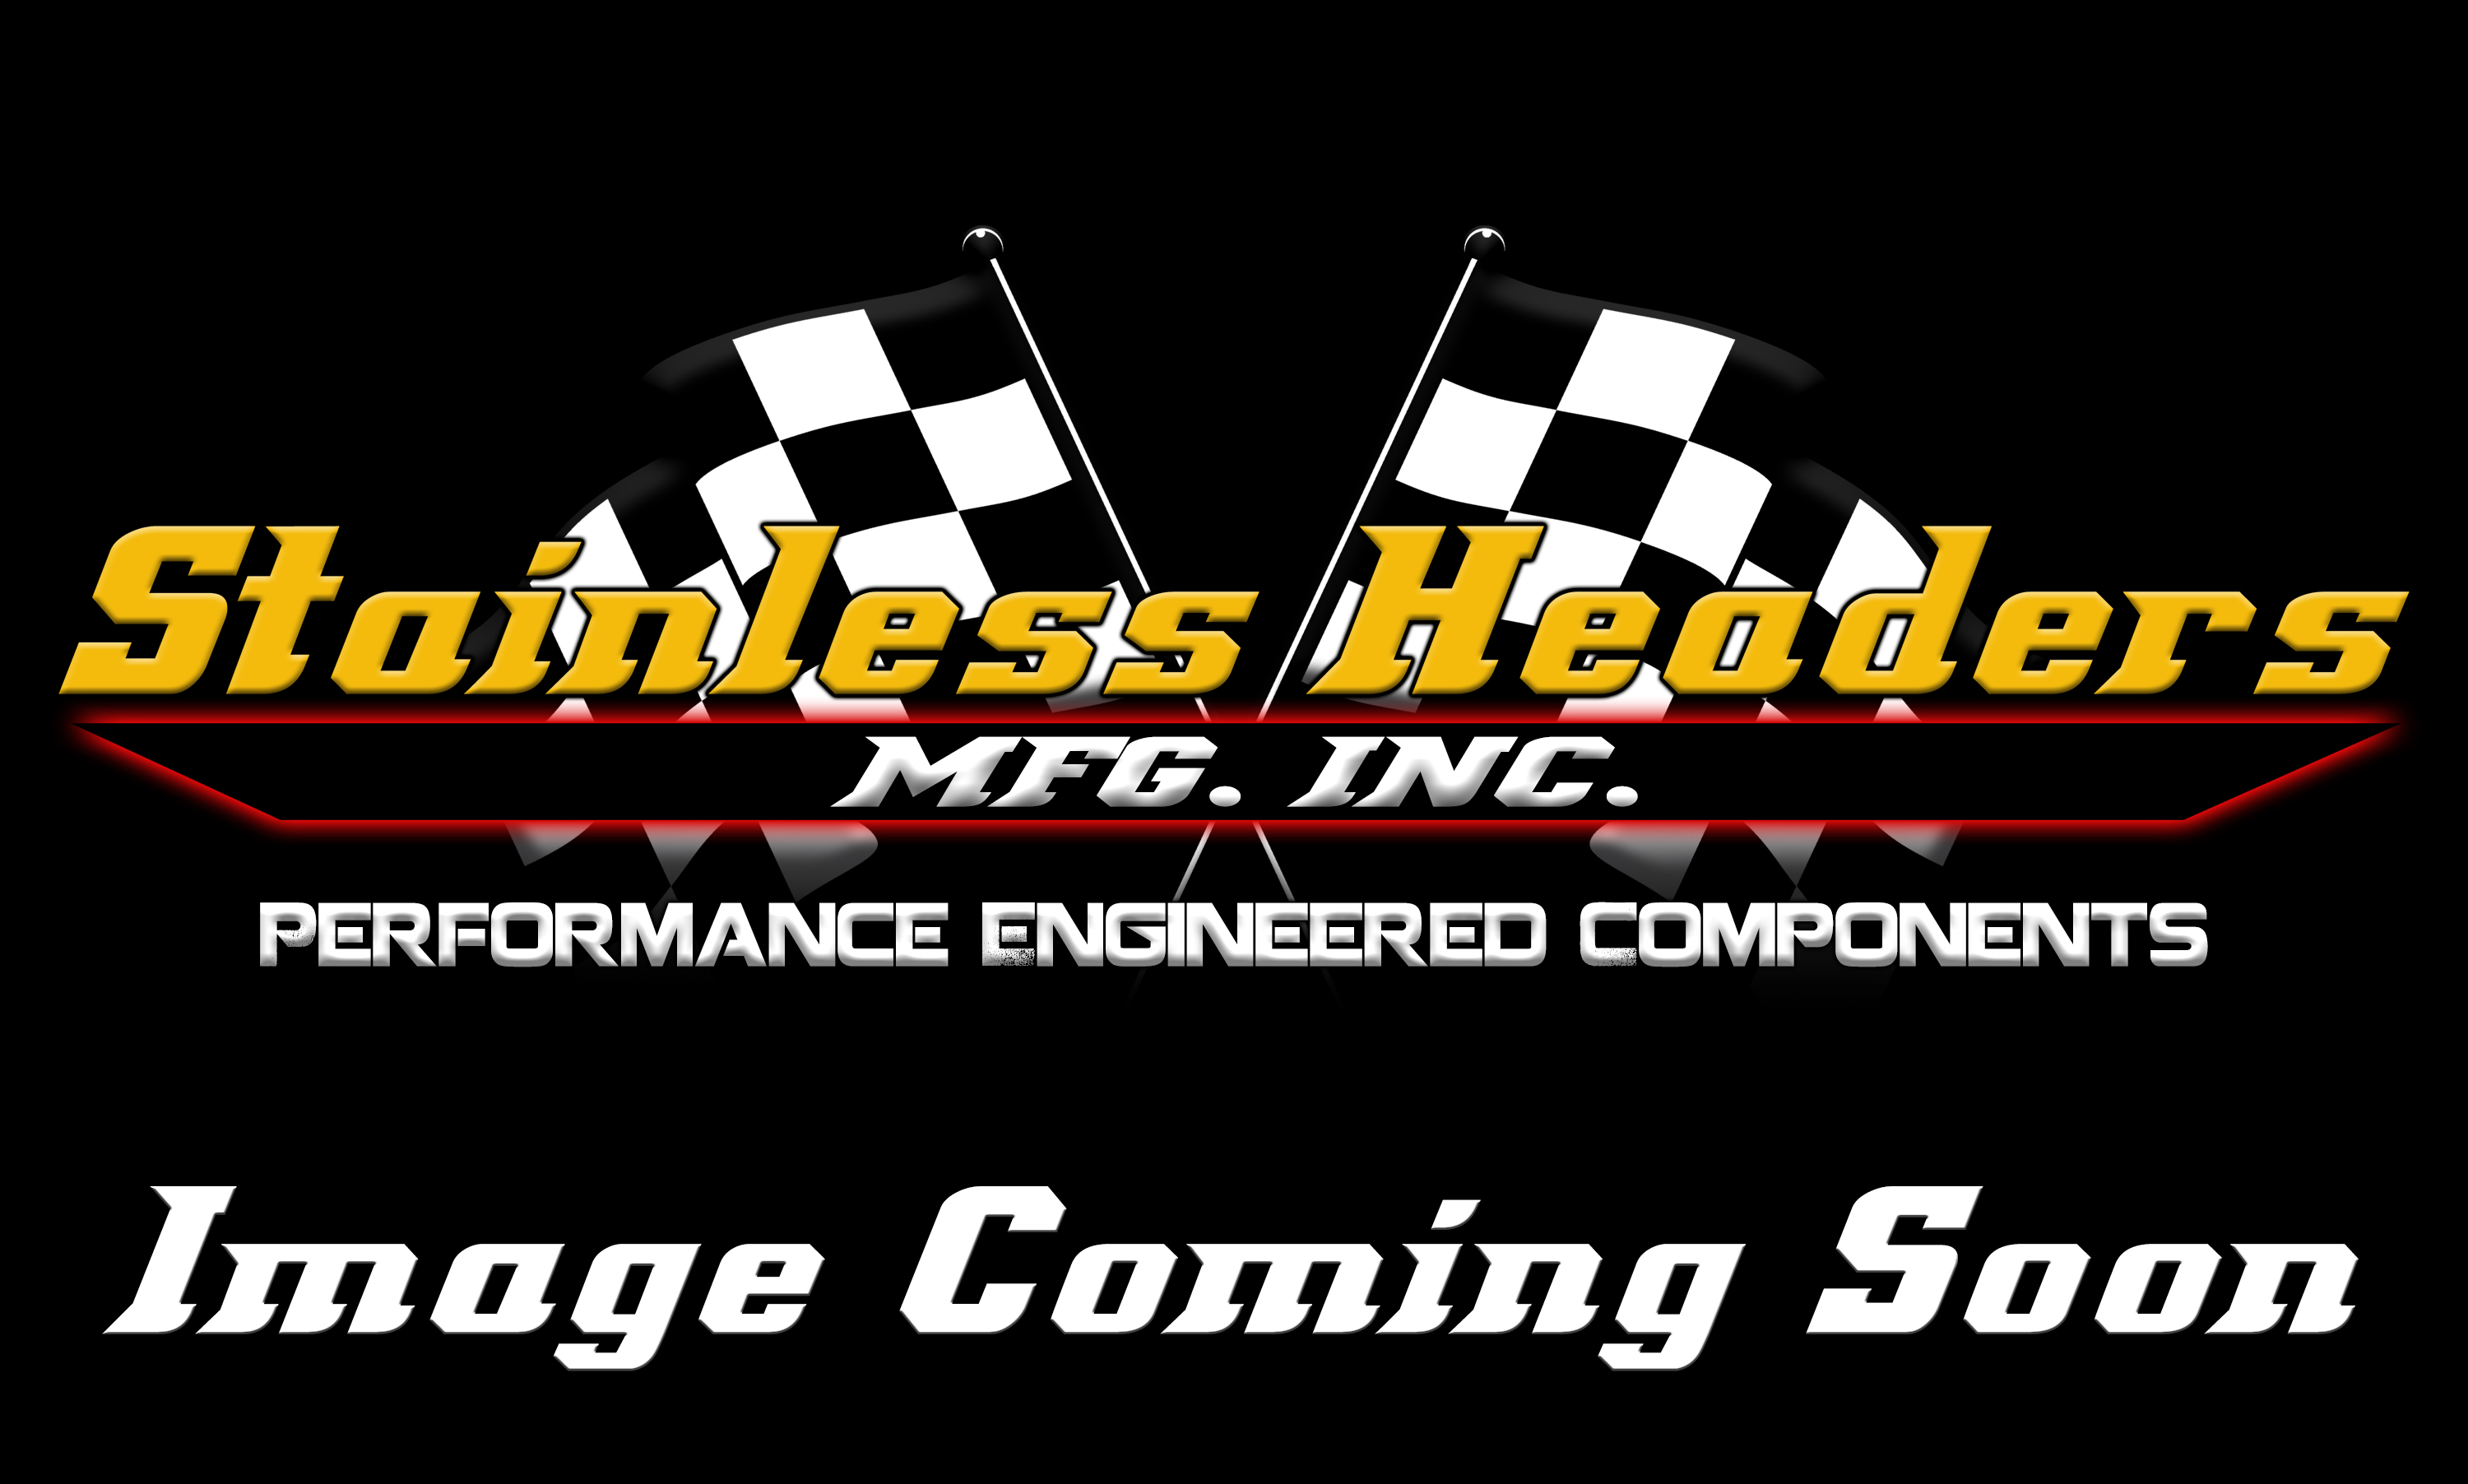 Stainless Headers - 1 5/8" Primary 8 into 1 Performance Merge Collector-16ga 304ss - Image 1